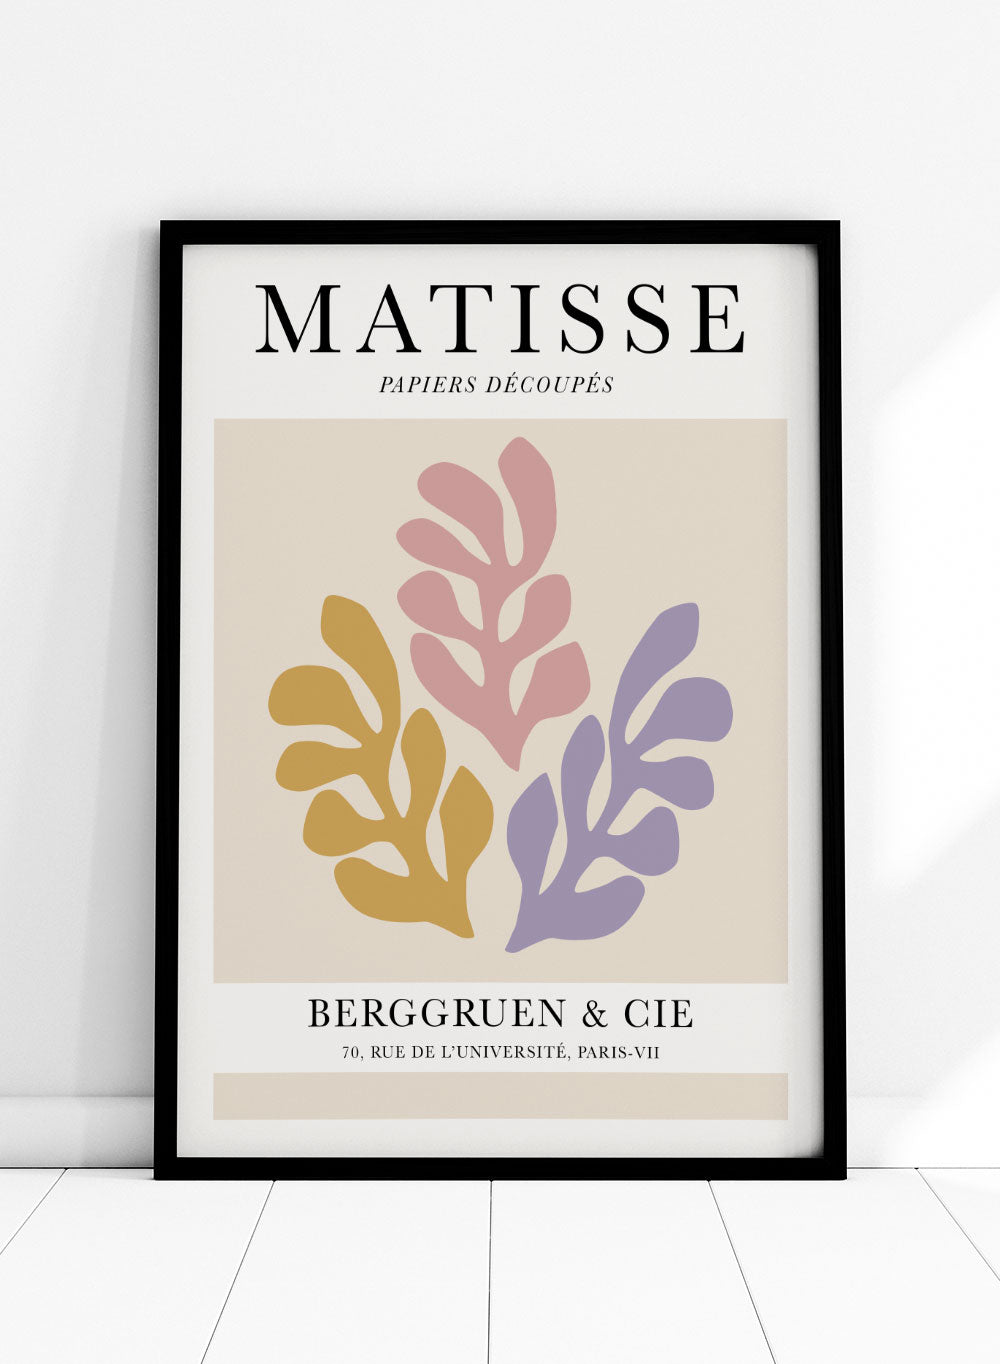 Henri Matisse, The Cut-Outs Series - Exhibition Poster No. 25